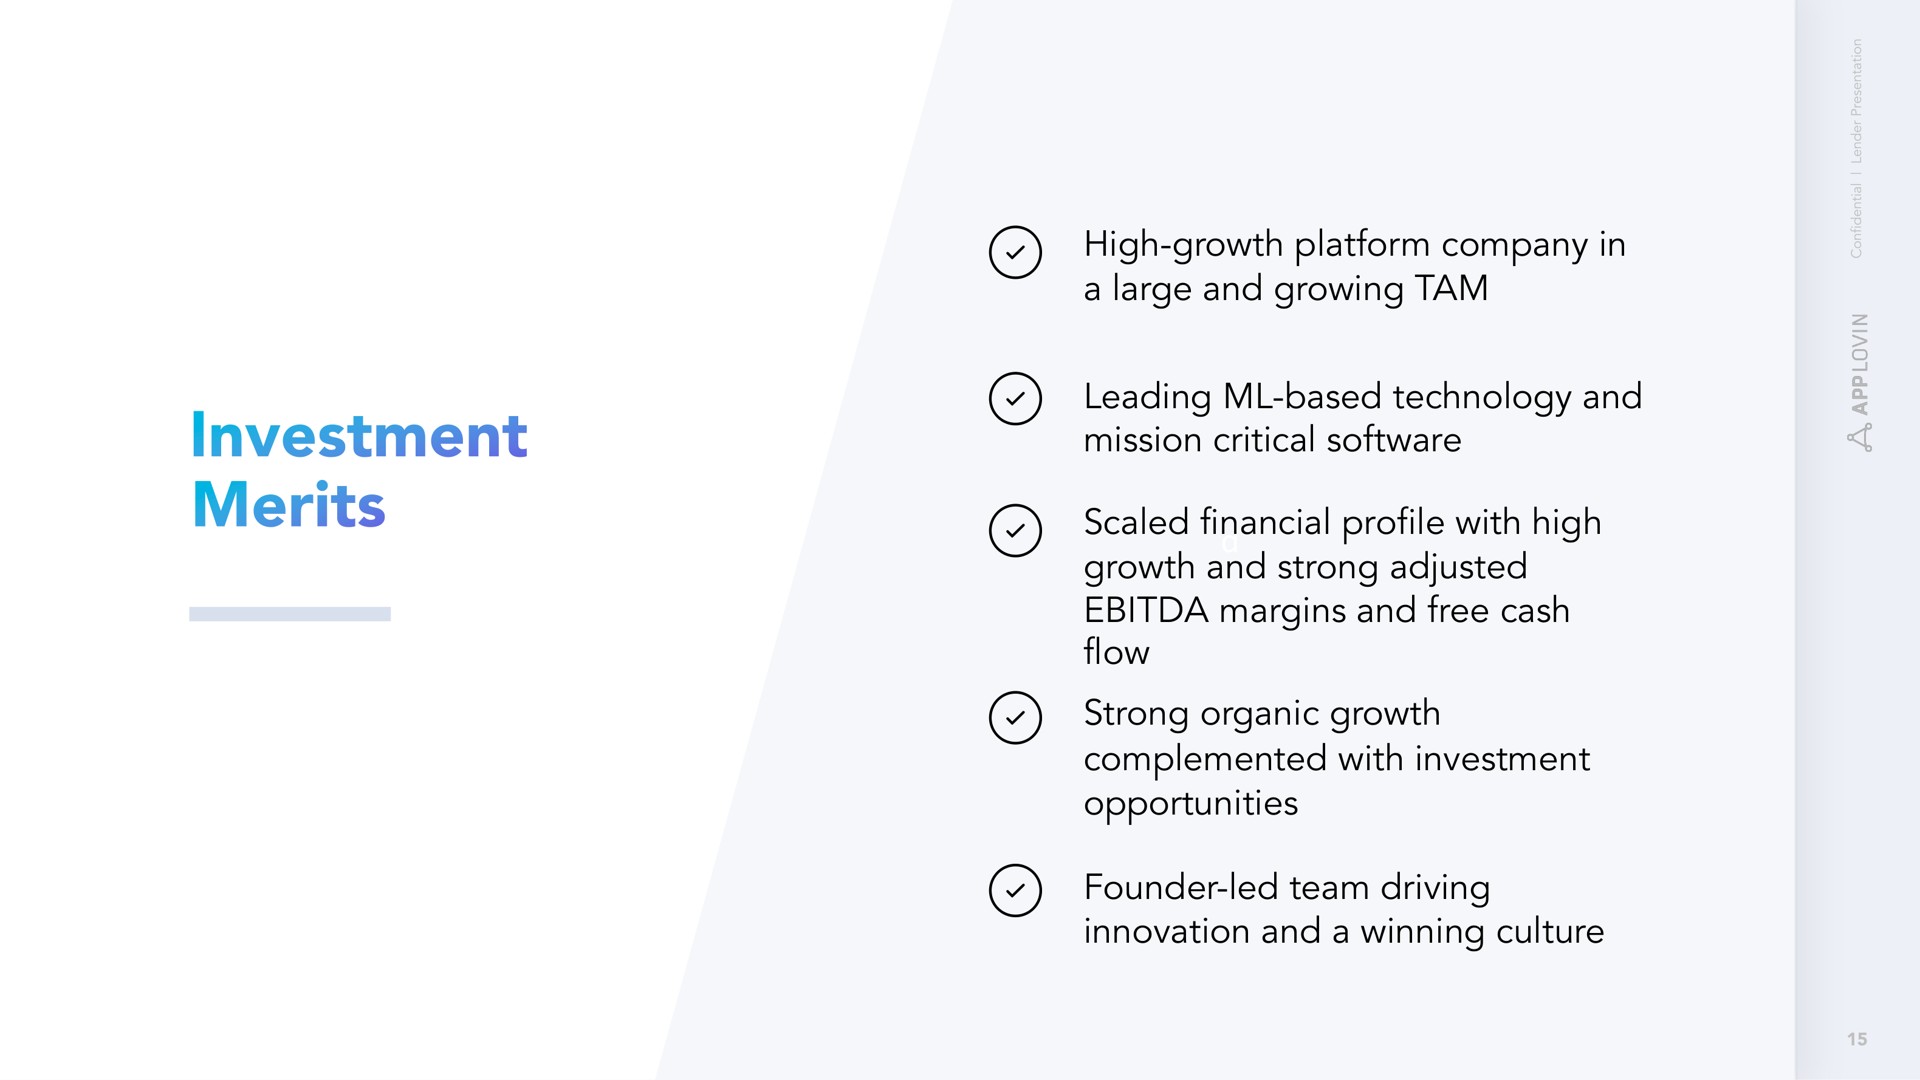 high growth platform company in a large and growing tam leading based technology and mission critical scaled financial profile with high growth and strong adjusted margins and free cash flow strong organic growth complemented with investment opportunities founder led team driving innovation and a winning culture merits | AppLovin